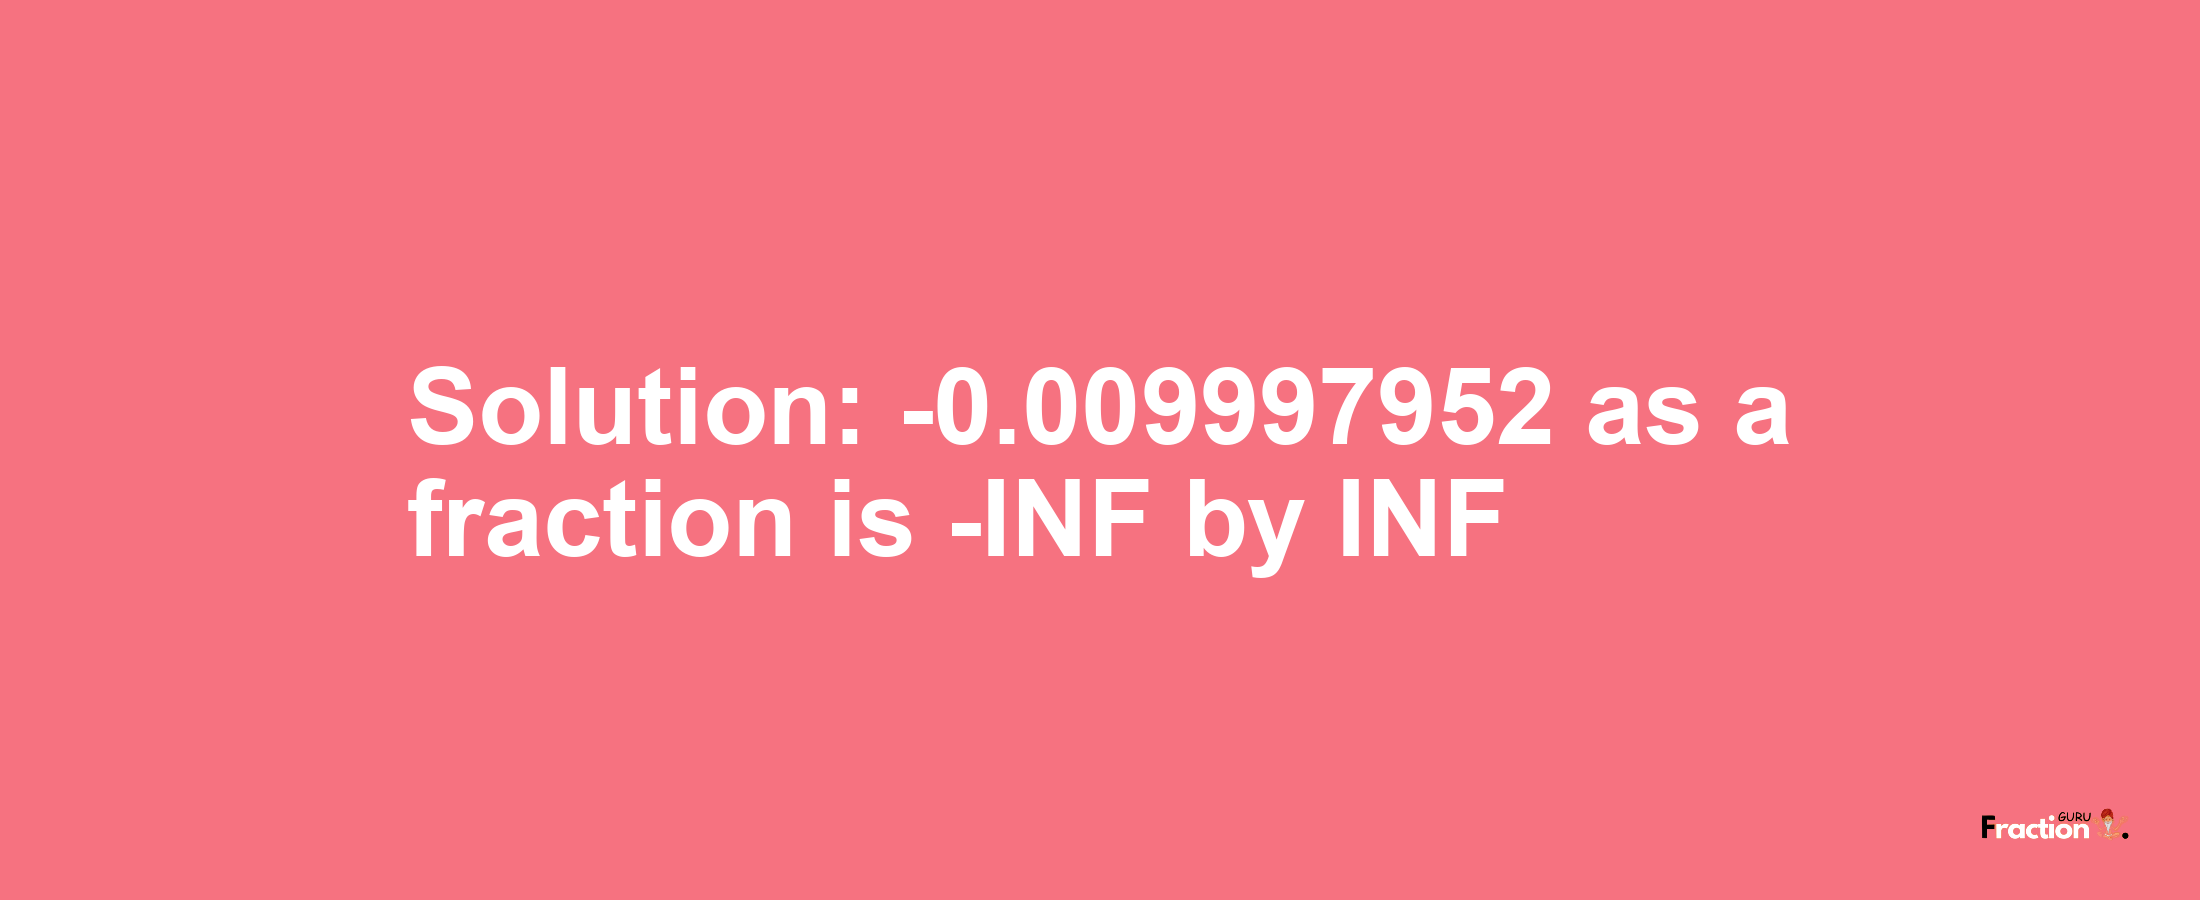 Solution:-0.009997952 as a fraction is -INF/INF